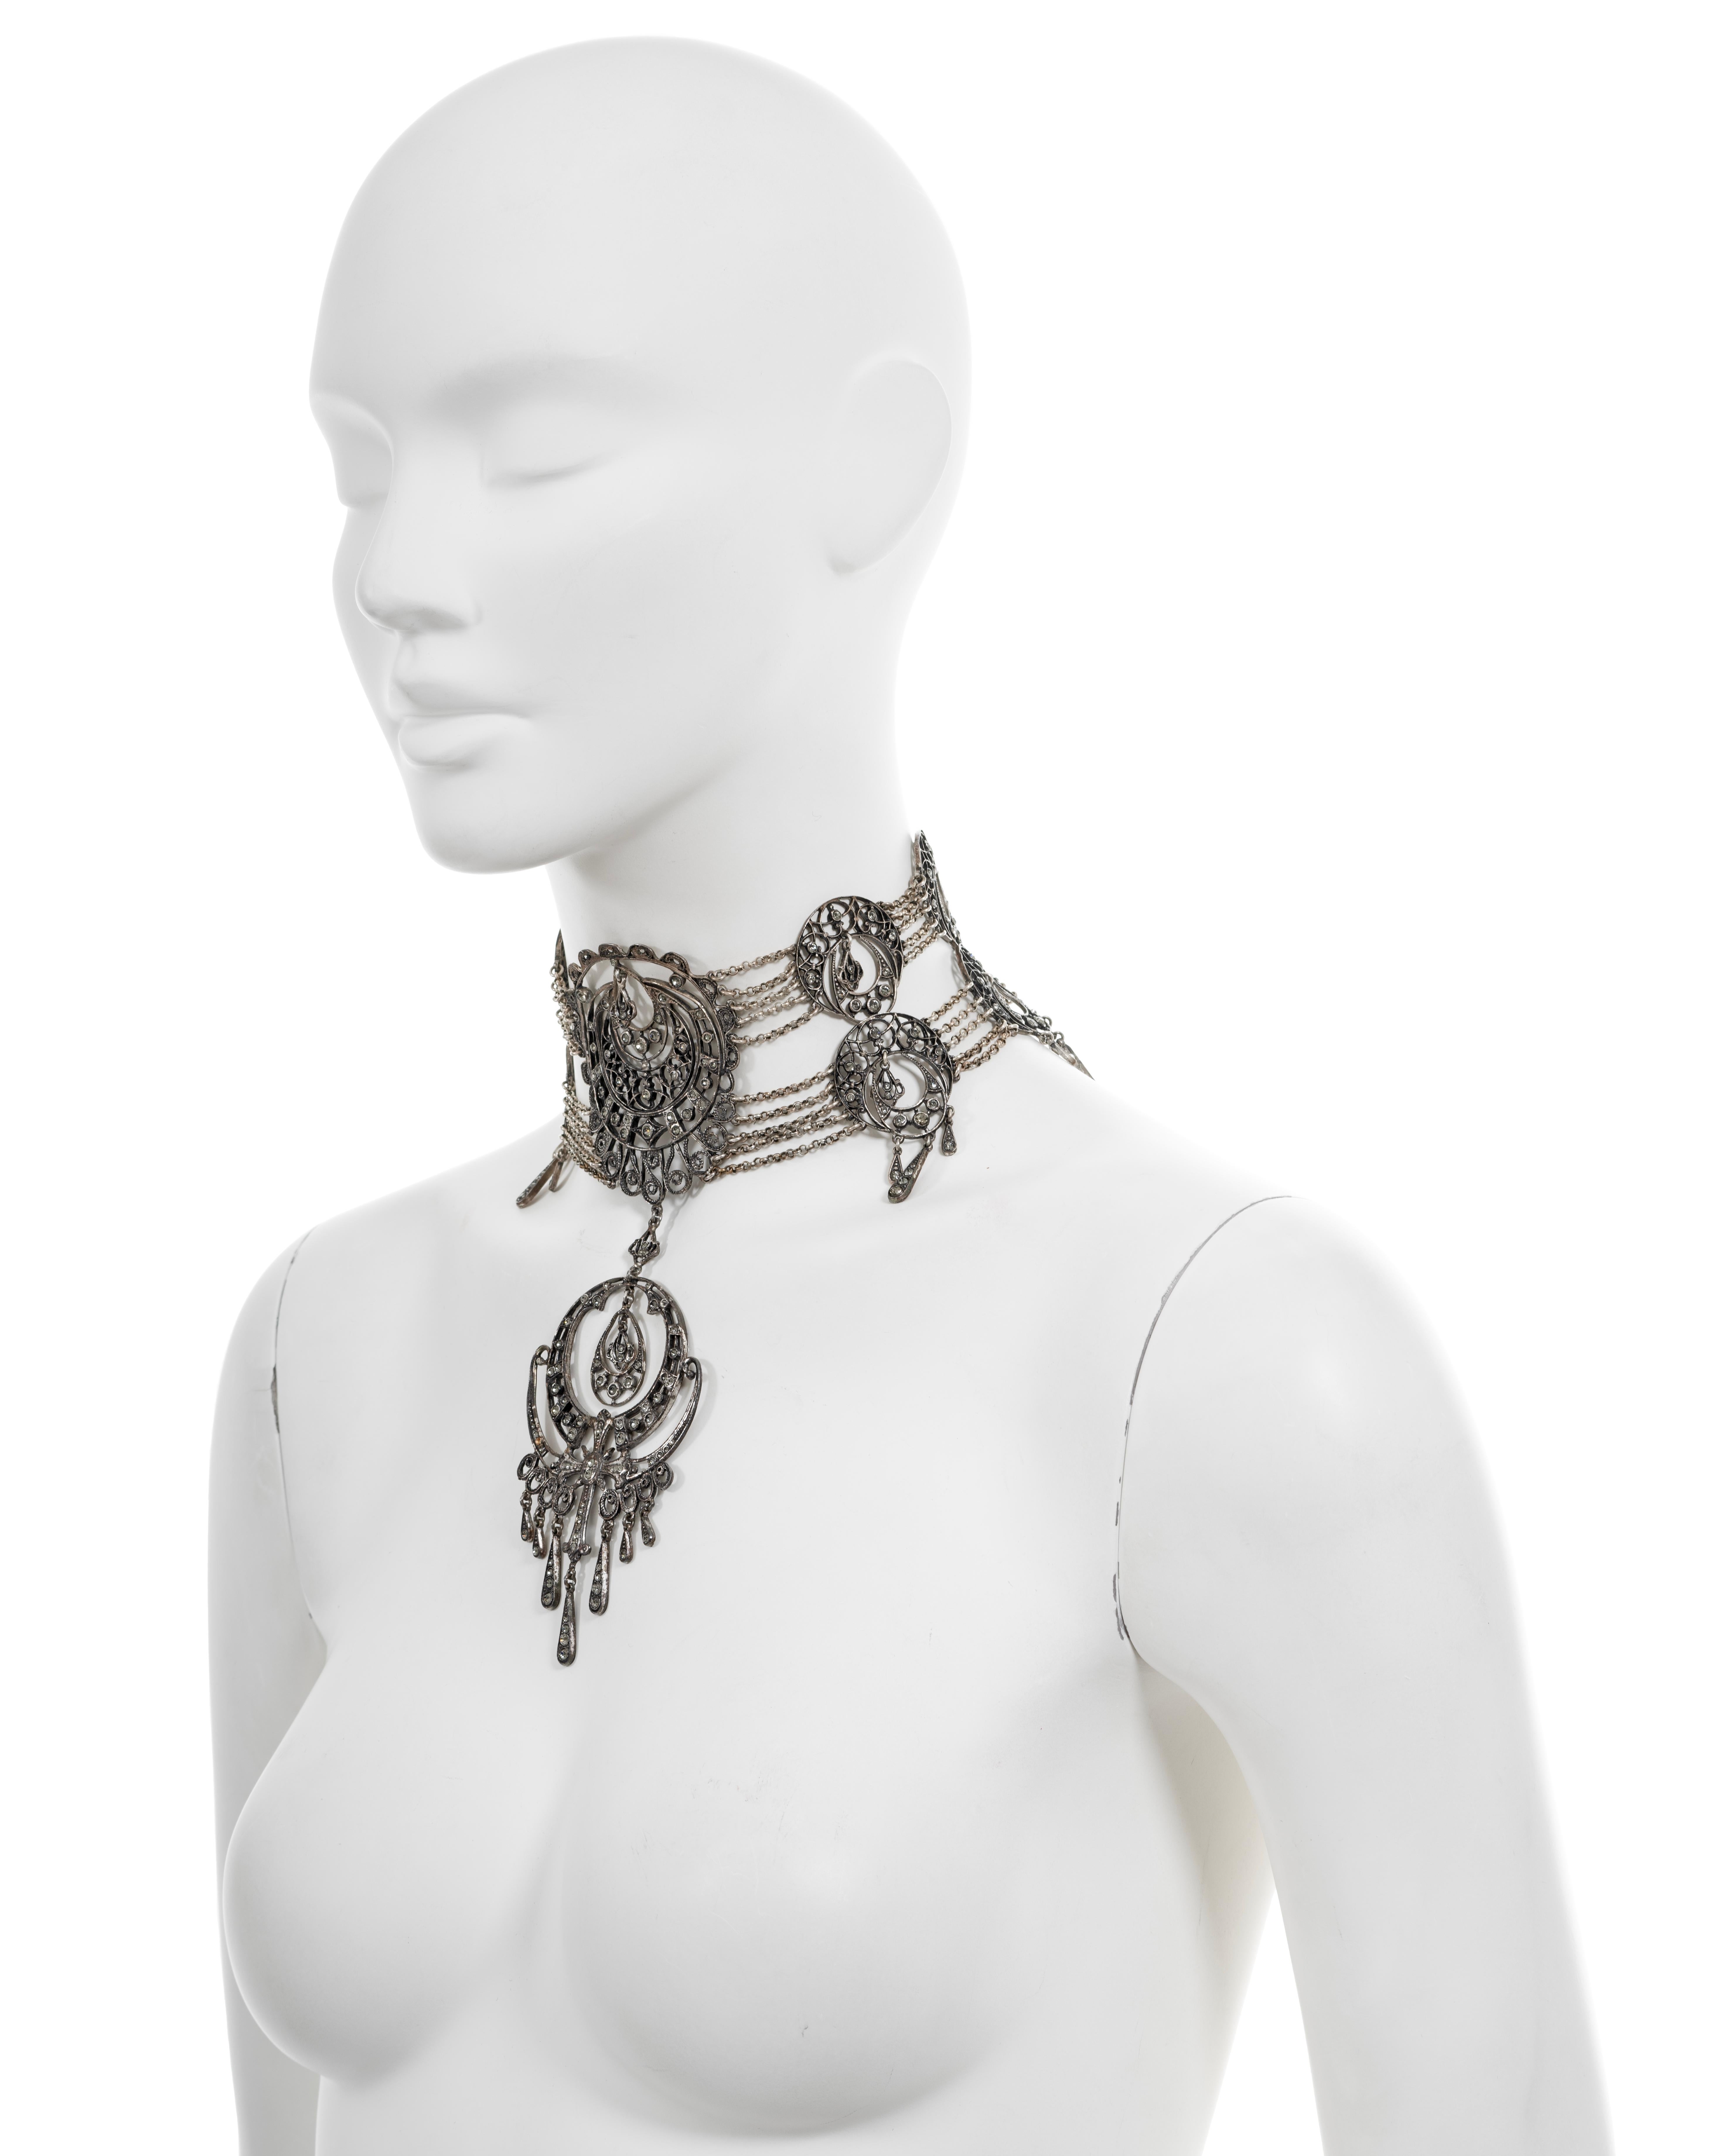 Christian Dior by John Galliano antique-style filigree choker necklace, ss 1999 For Sale 3